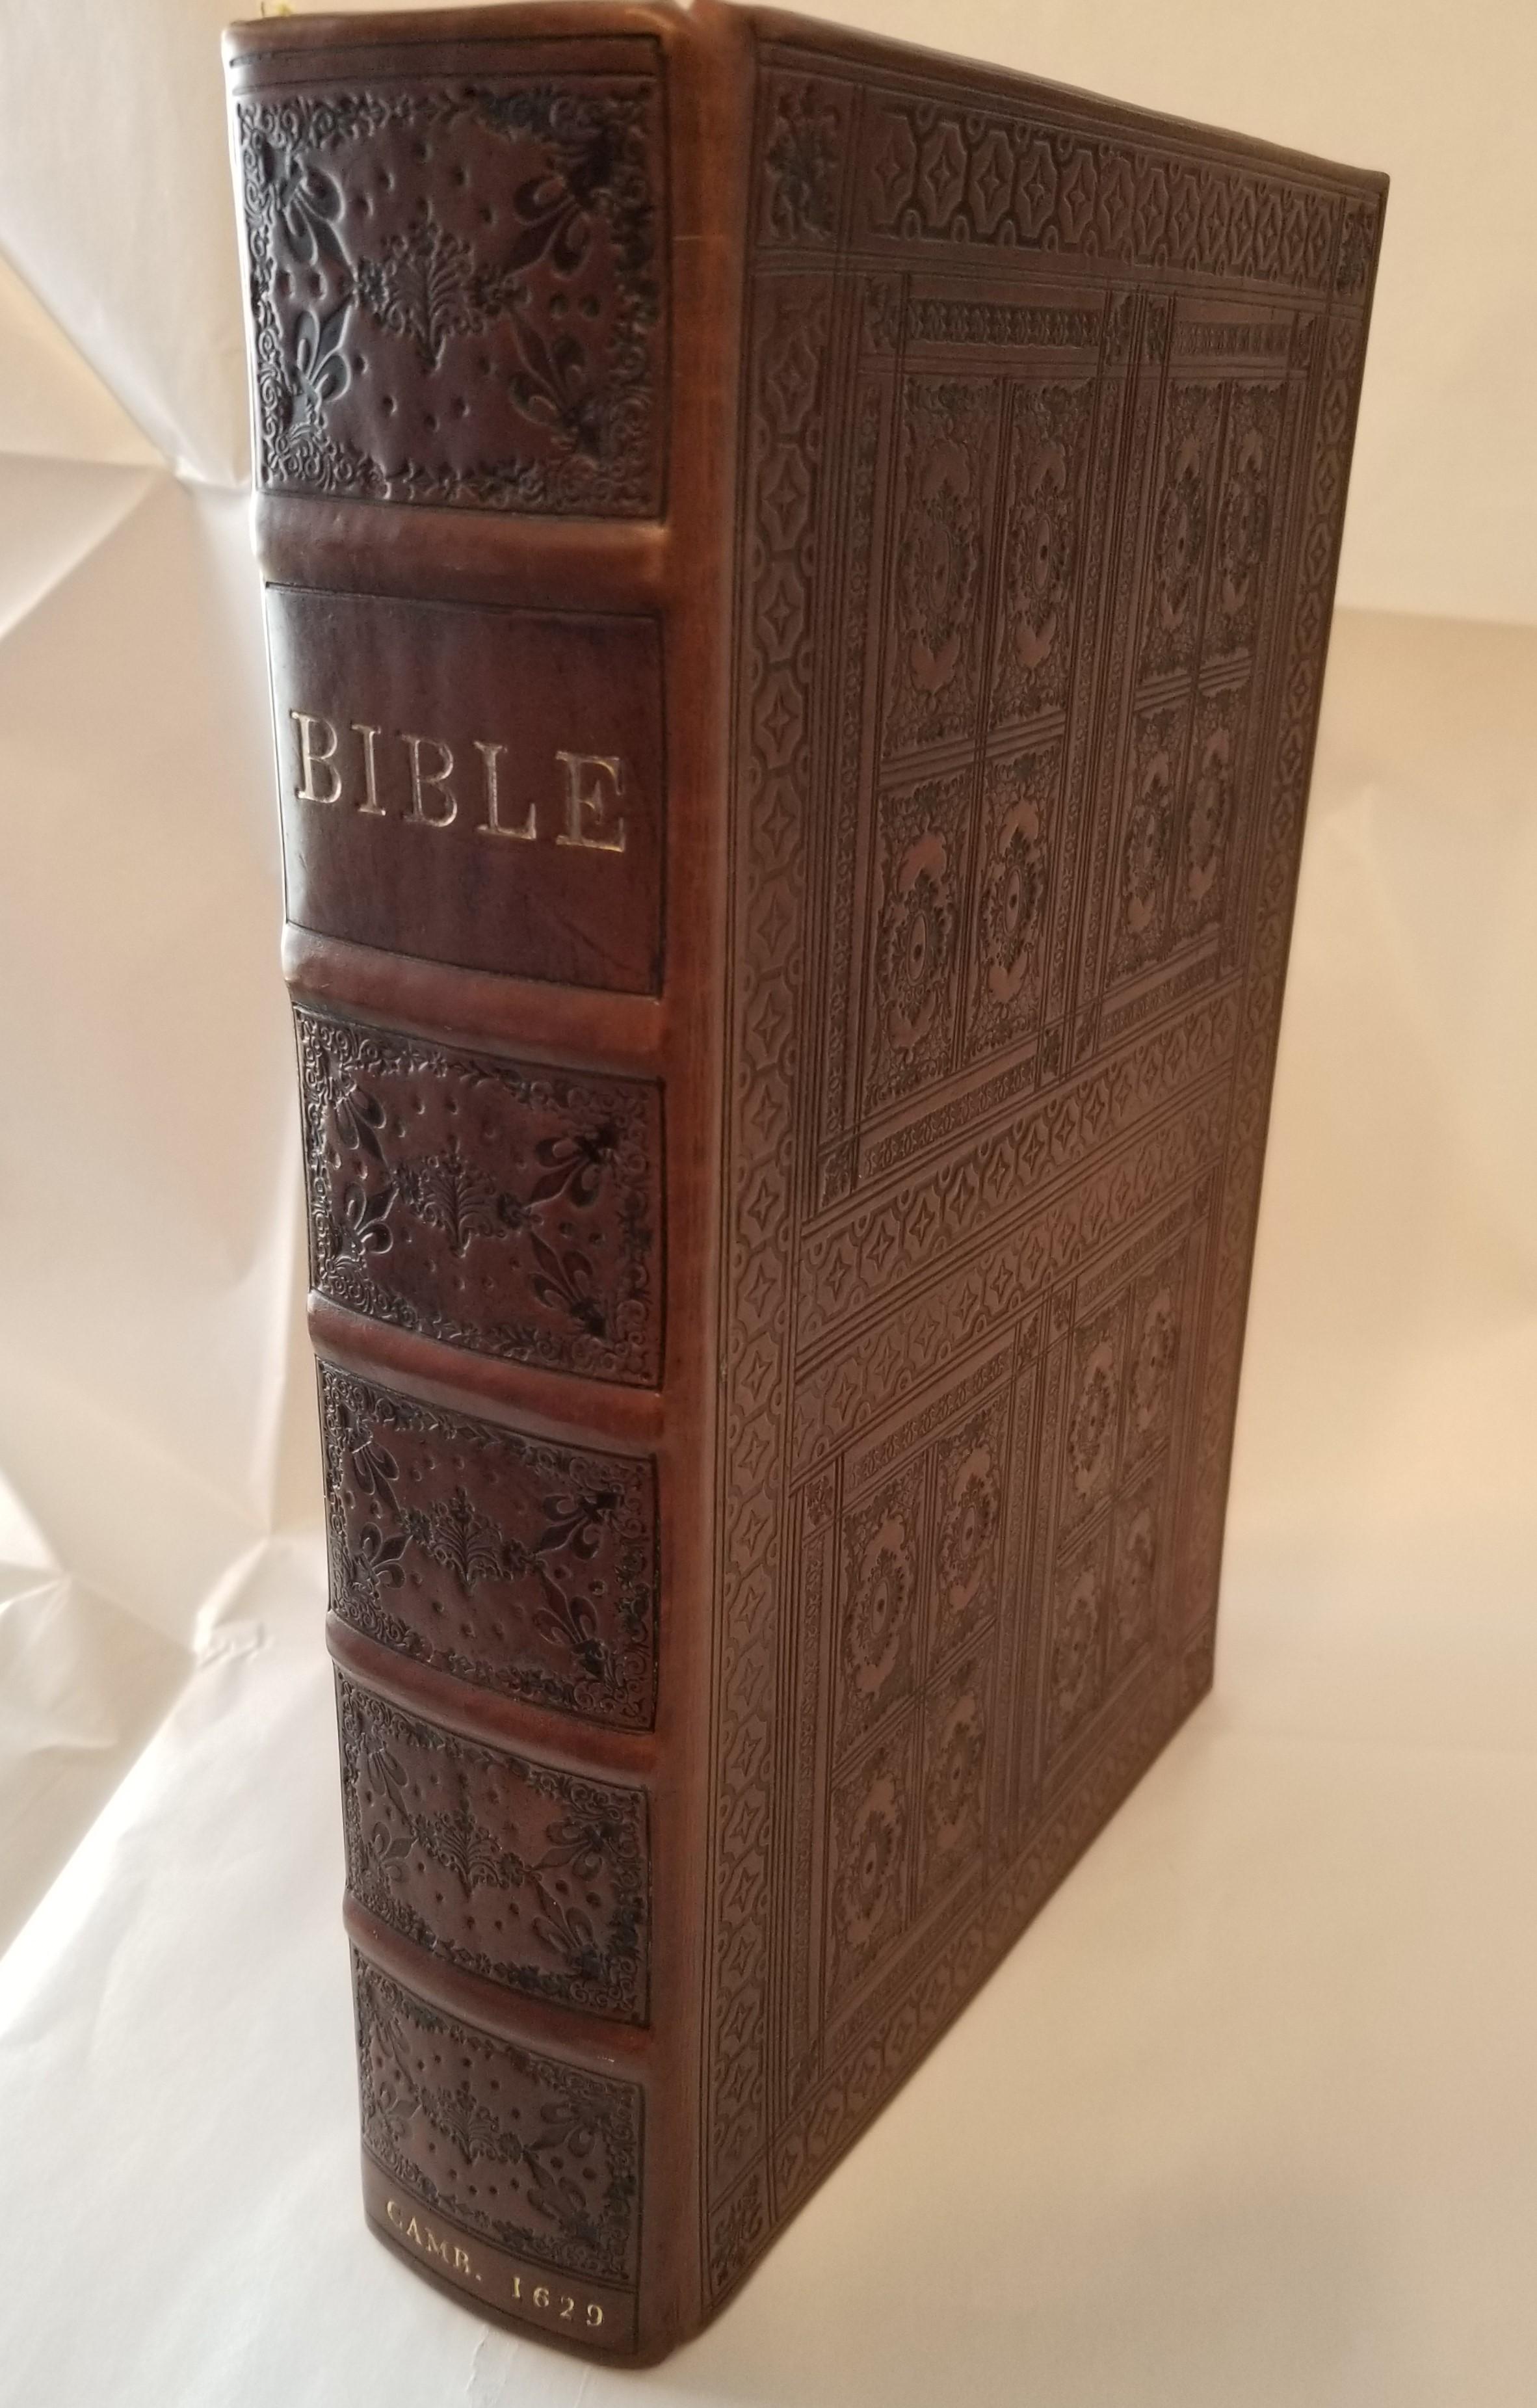 1629 Complete Cambridge Bible King James First Edition Folio Title Engraving - Print by Unknown